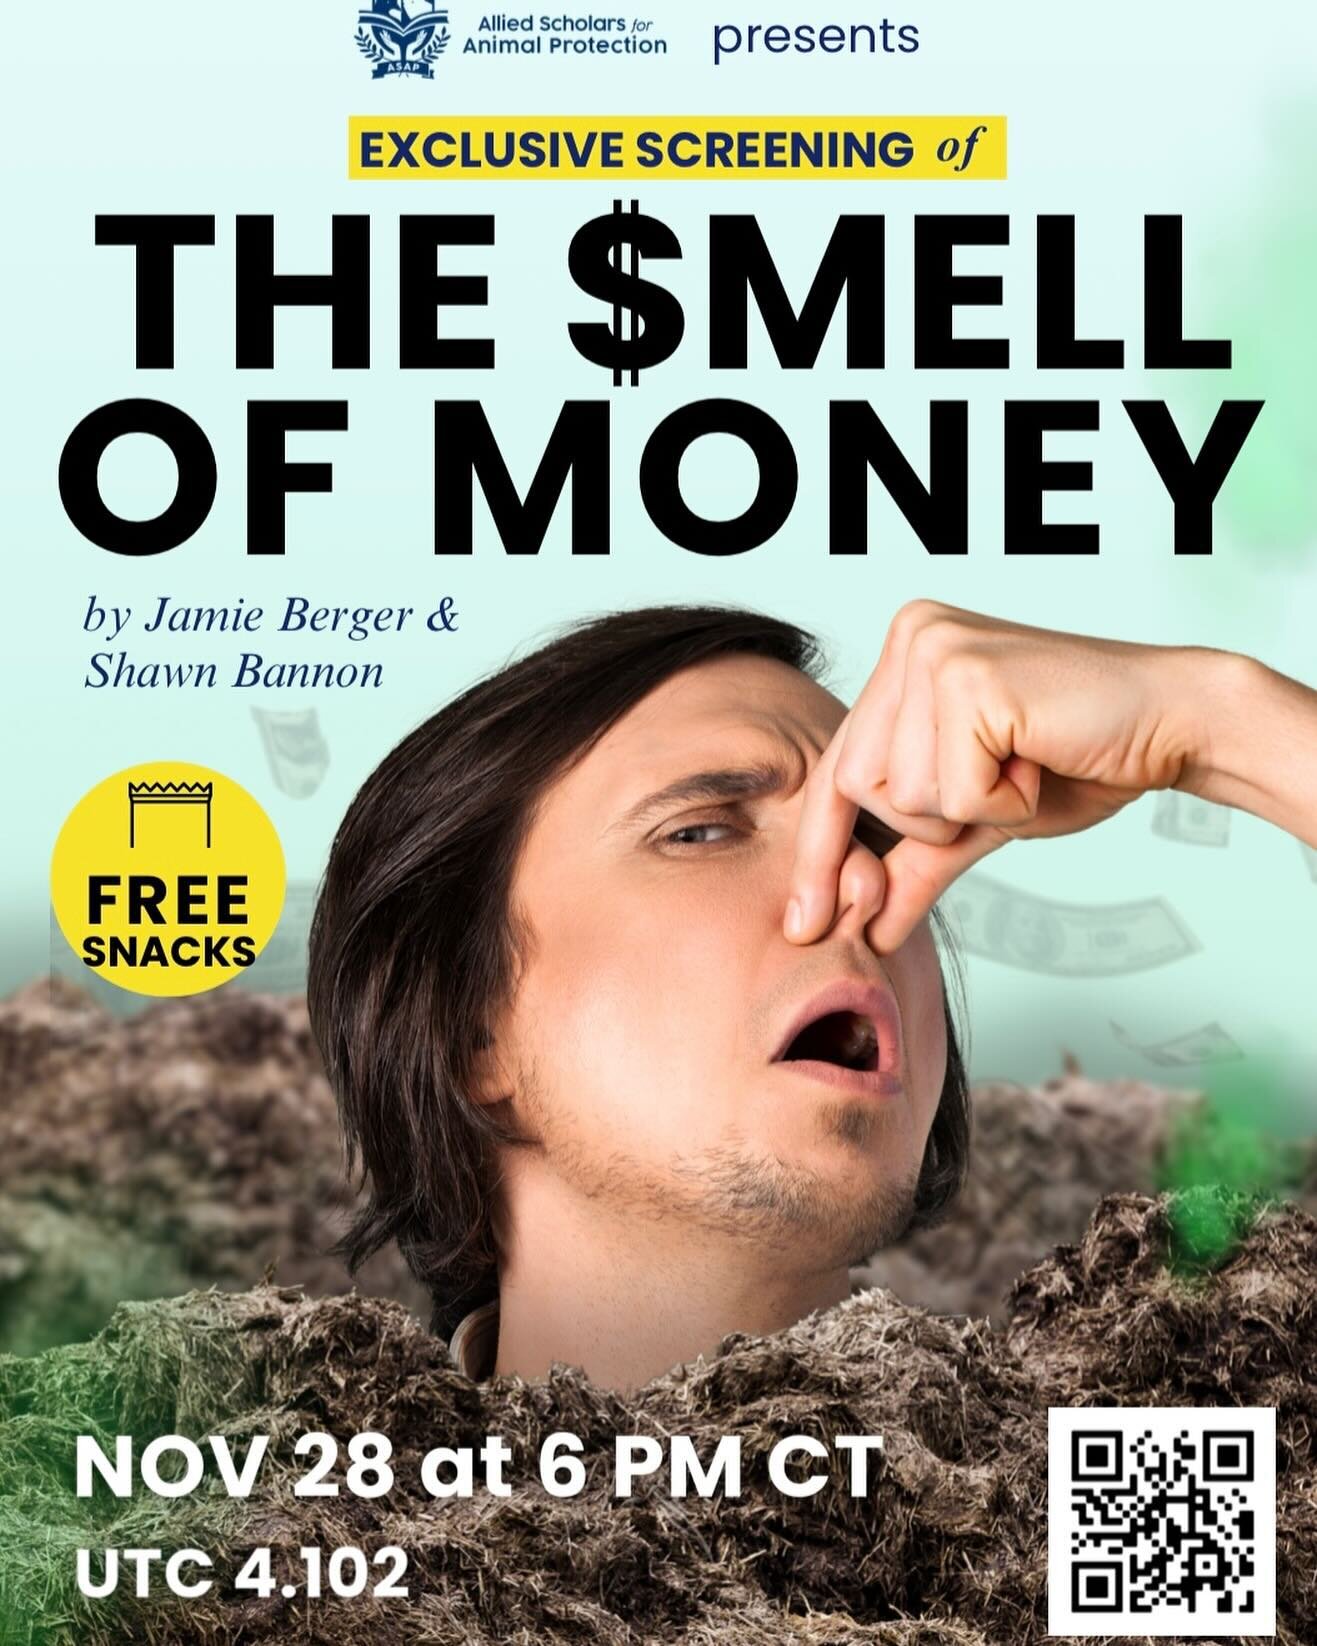 Come join us tomorrow evening for an exclusive screening of The Smell of Money, an unreleased movie detailing the corruption of animal agriculture!